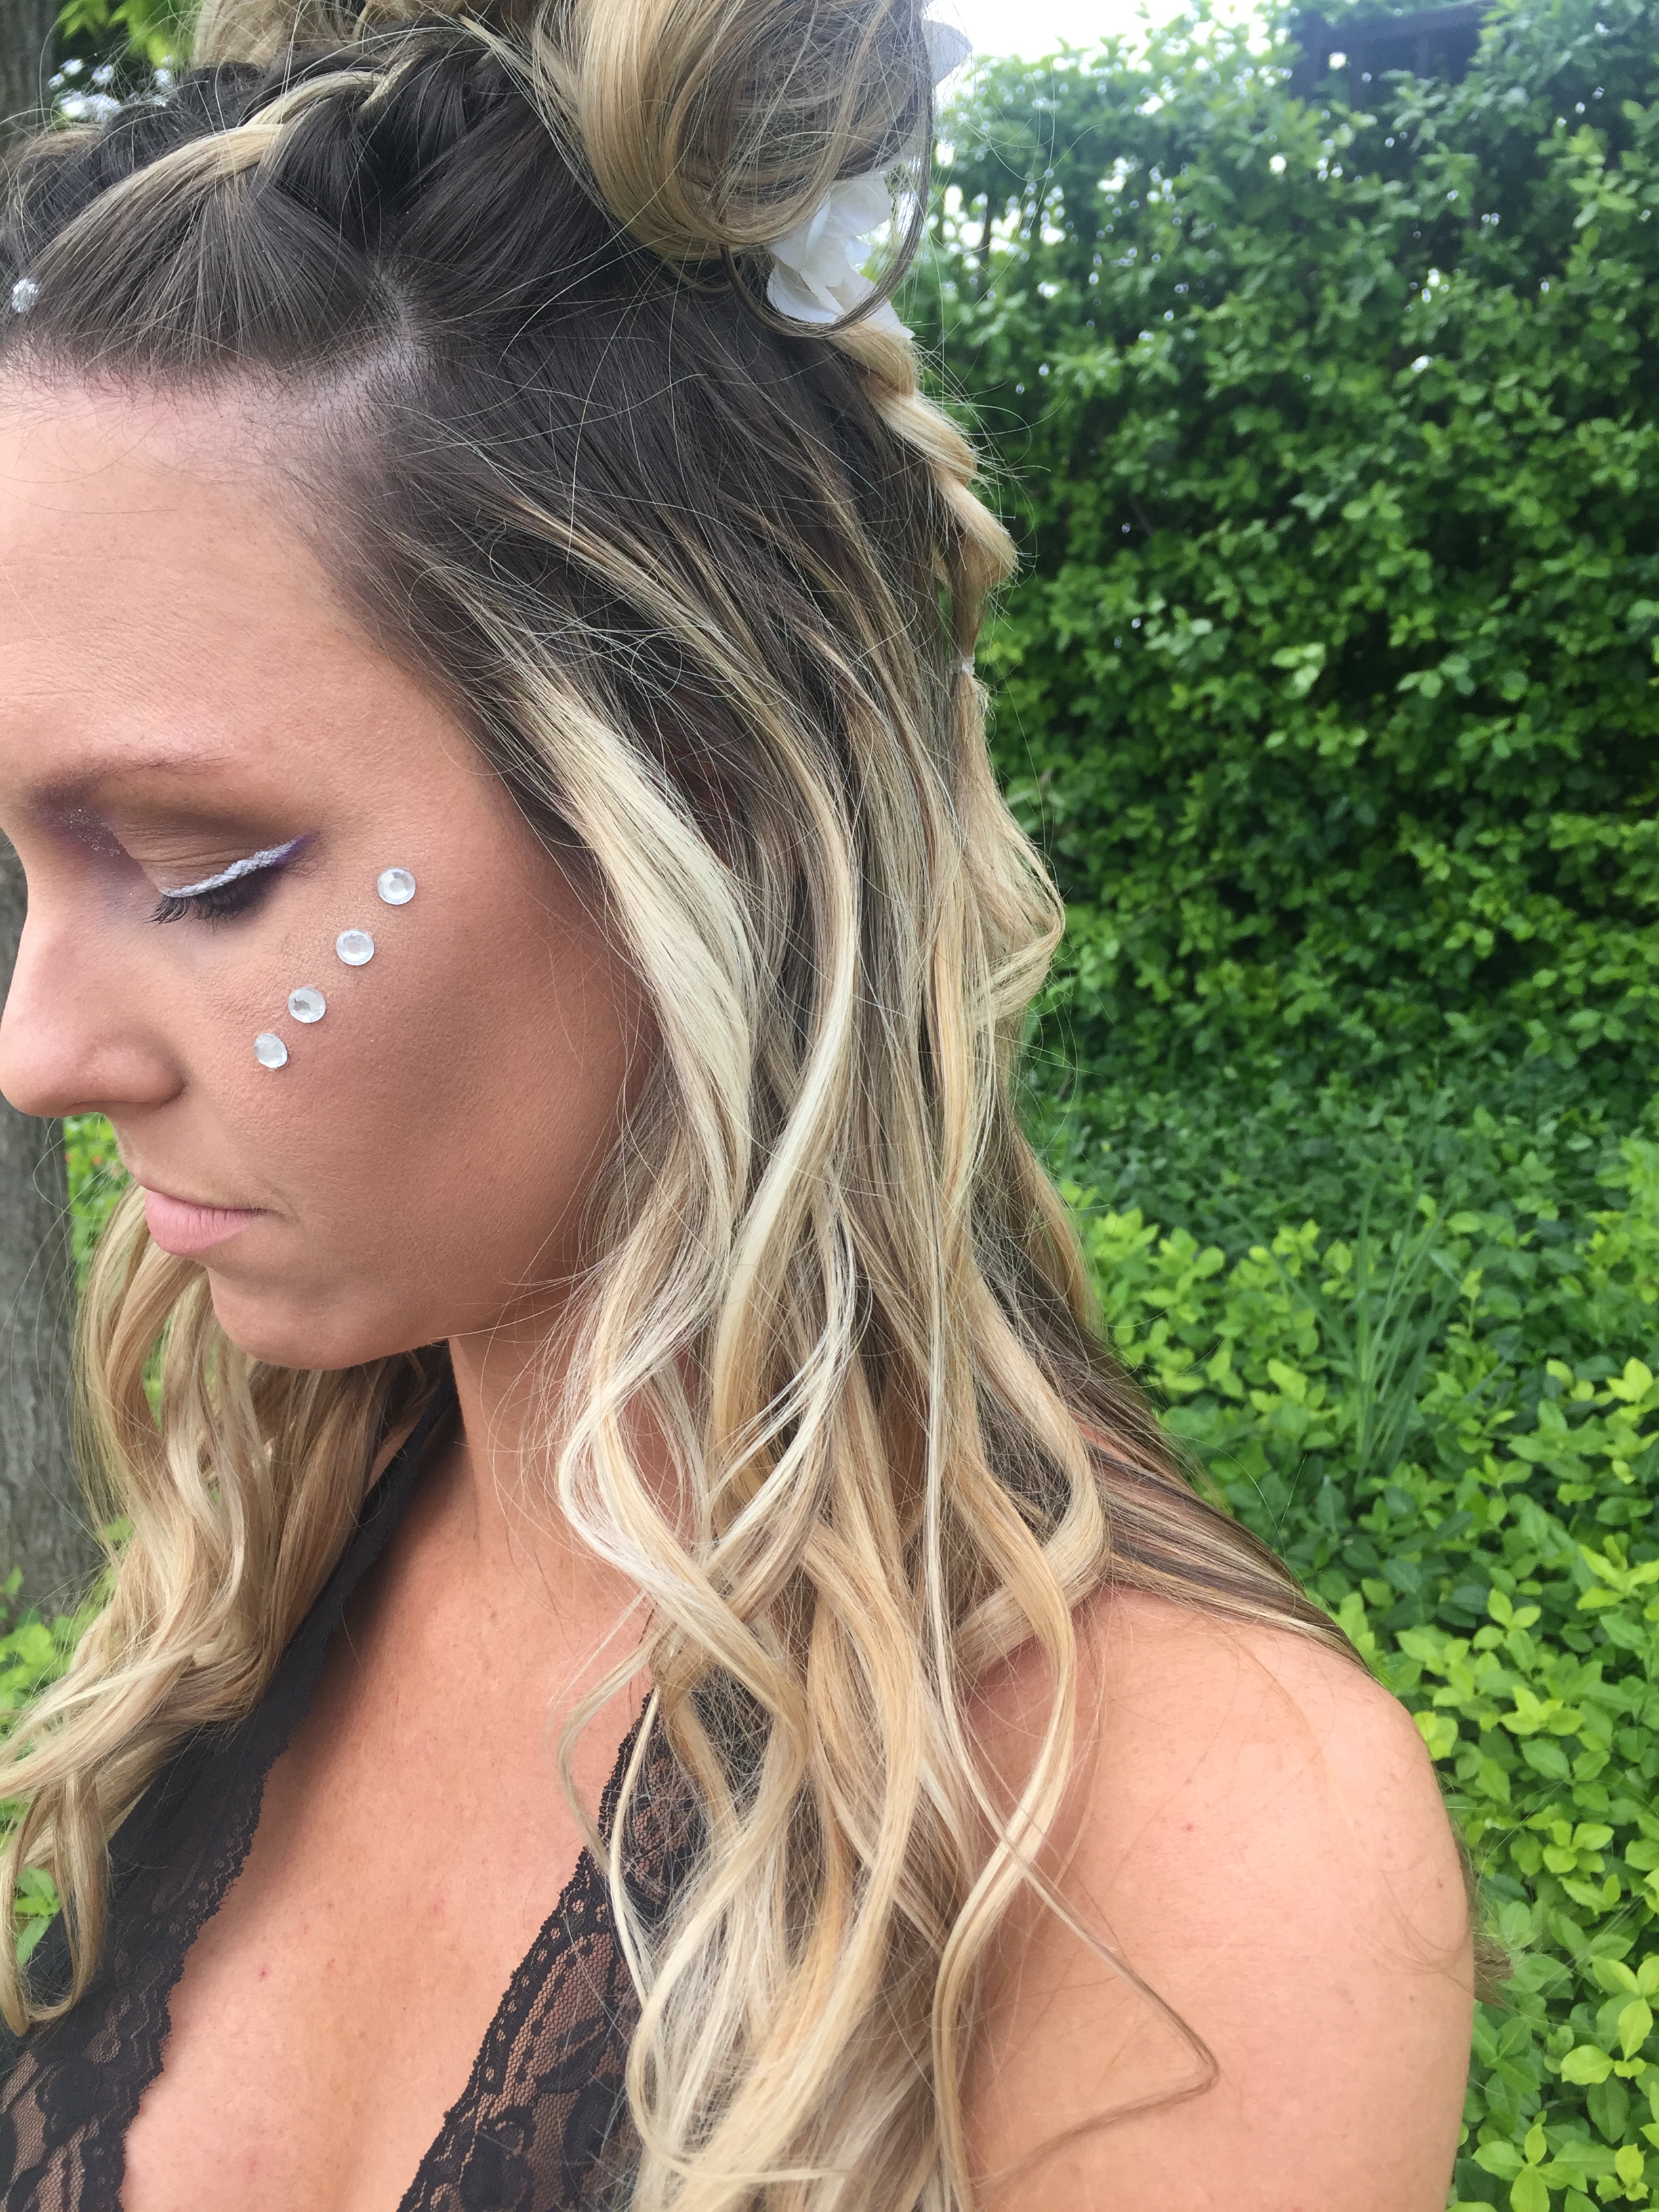 Rhinestones on the cheek complete the look for a festival.